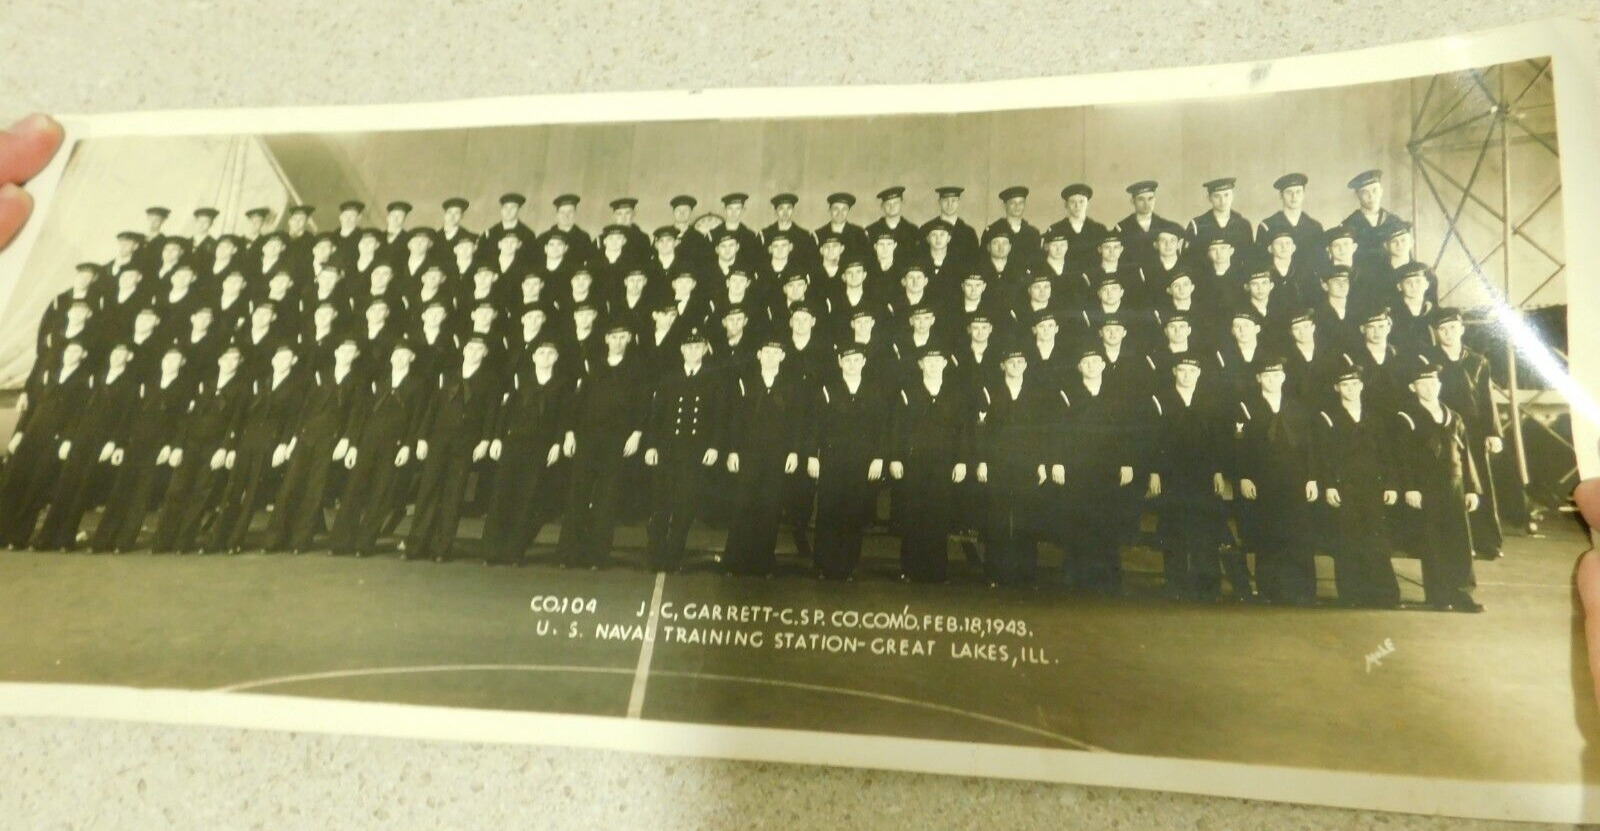 Vintage 1943 WWII US Naval Training Station Great Lakes Co. 104 Photos